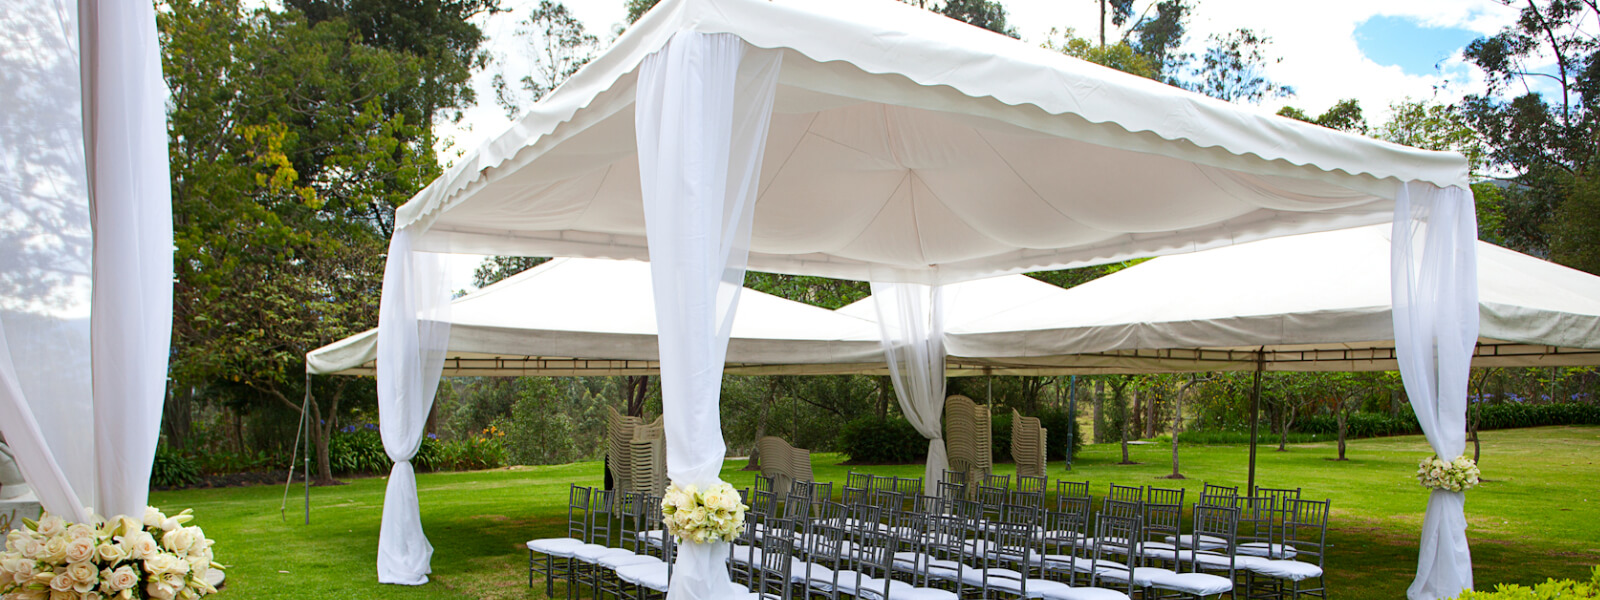 Professional Marquees